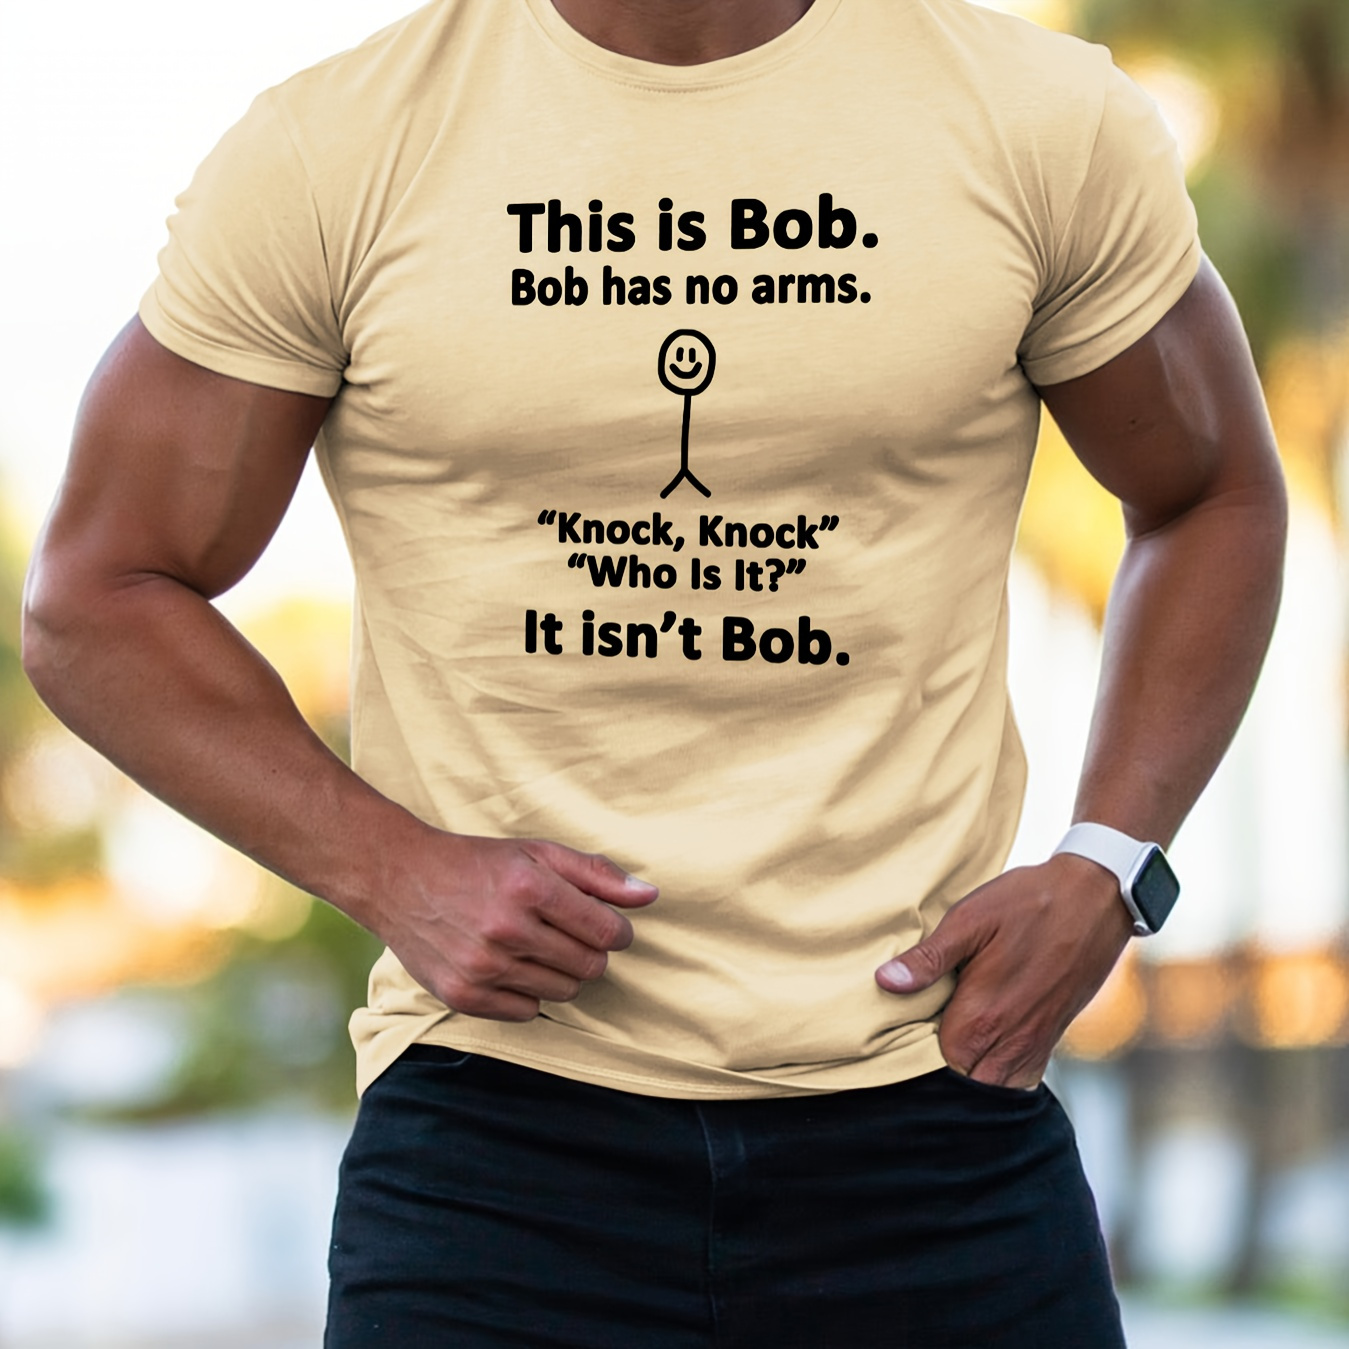 

This Is Bob Print Short Sleeve T-shirt Tees, Comfy Breathable Tops For Men, Summer, Outdoor, Men's Clothing